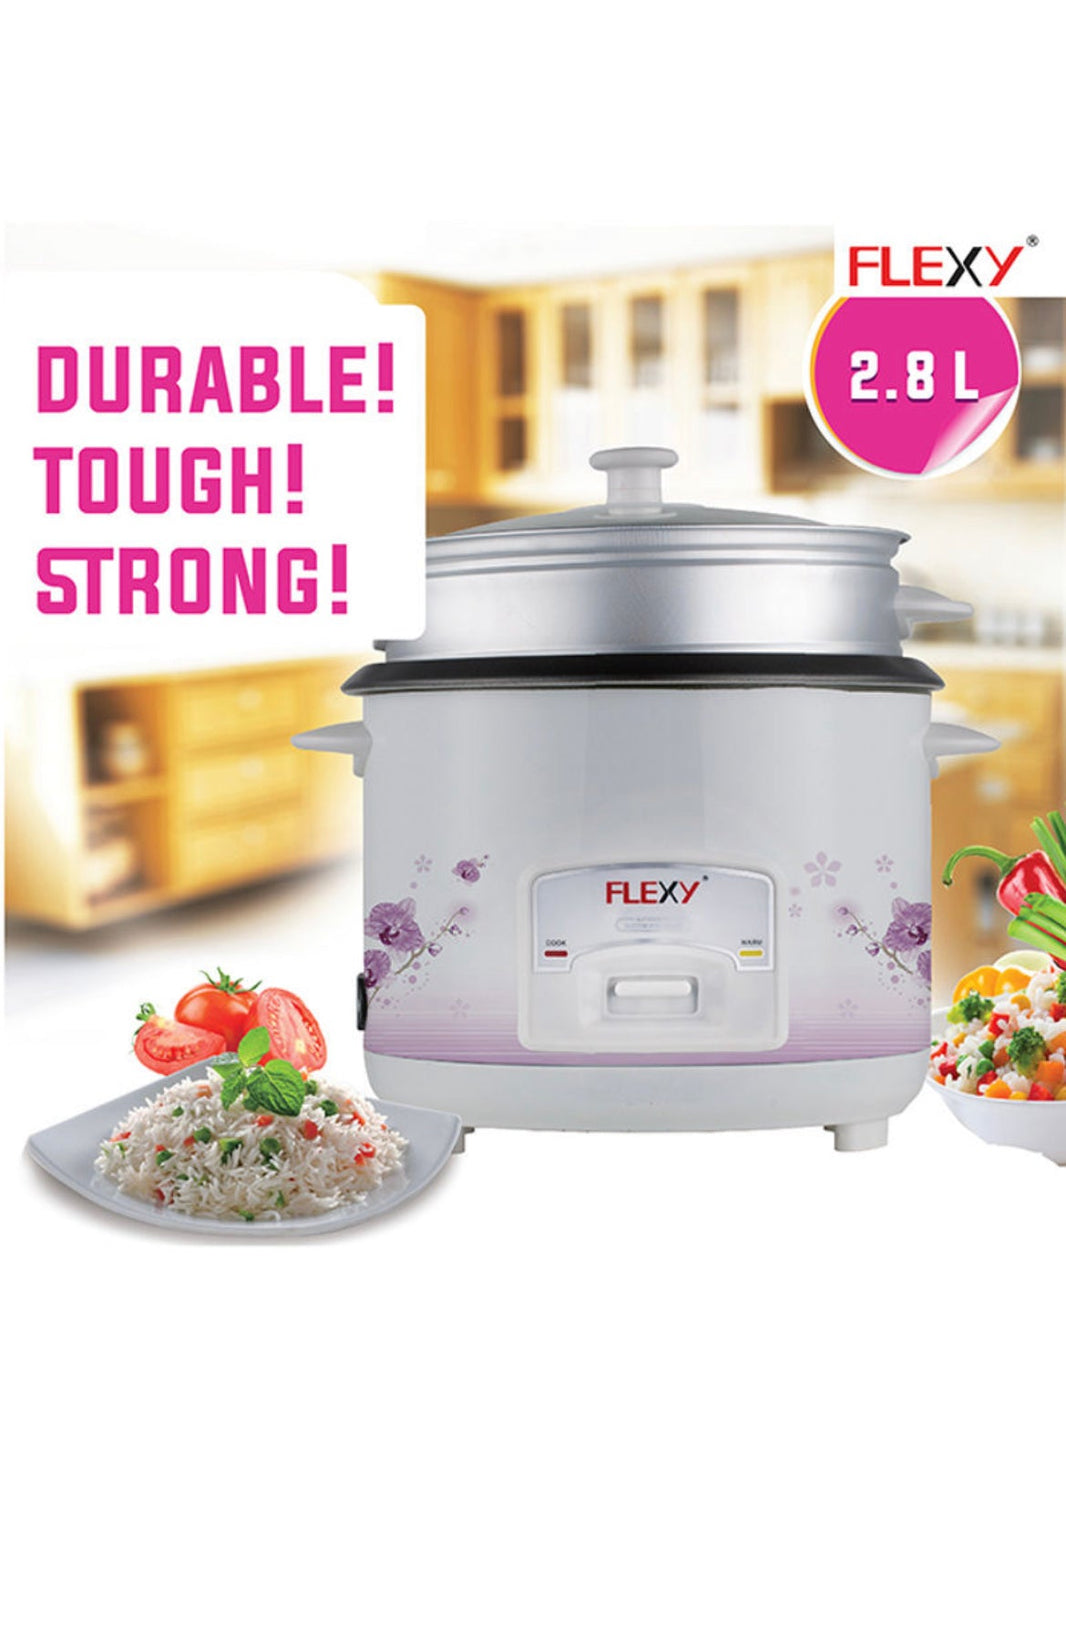 Flexy Electric Rice Cooker 2.8 l 1000 W